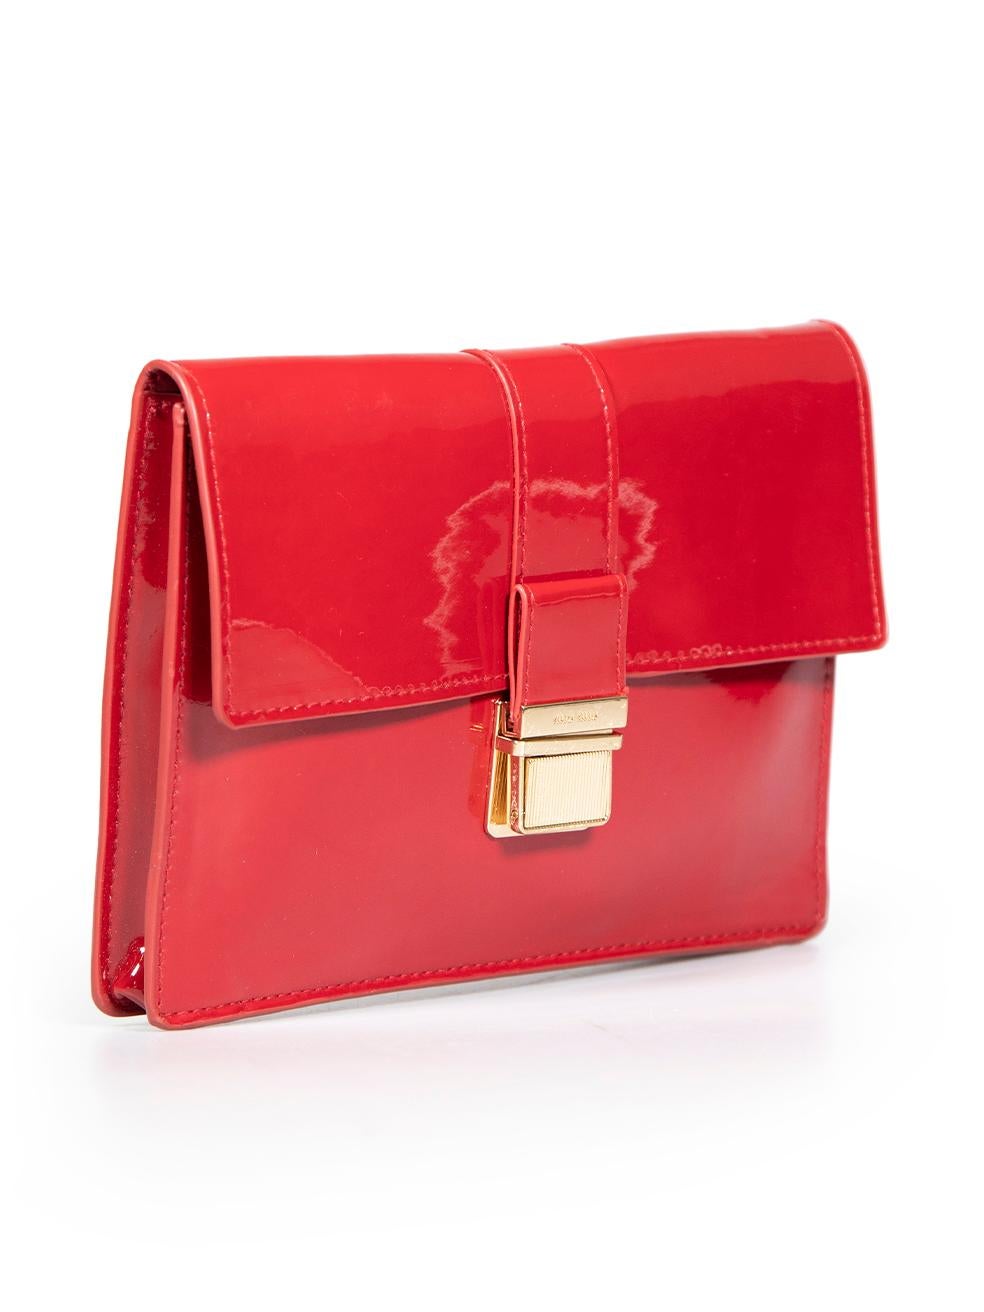 CONDITION is Very good. Minimal wear to wallet is evident. Minimal wear to the leather surface with some light indents, creasing and scratching seen on this used Miu Miu designer resale item.
 
 
 
 Details
 
 
 Red 
 
 Patent leather
 
 Pouch
 
